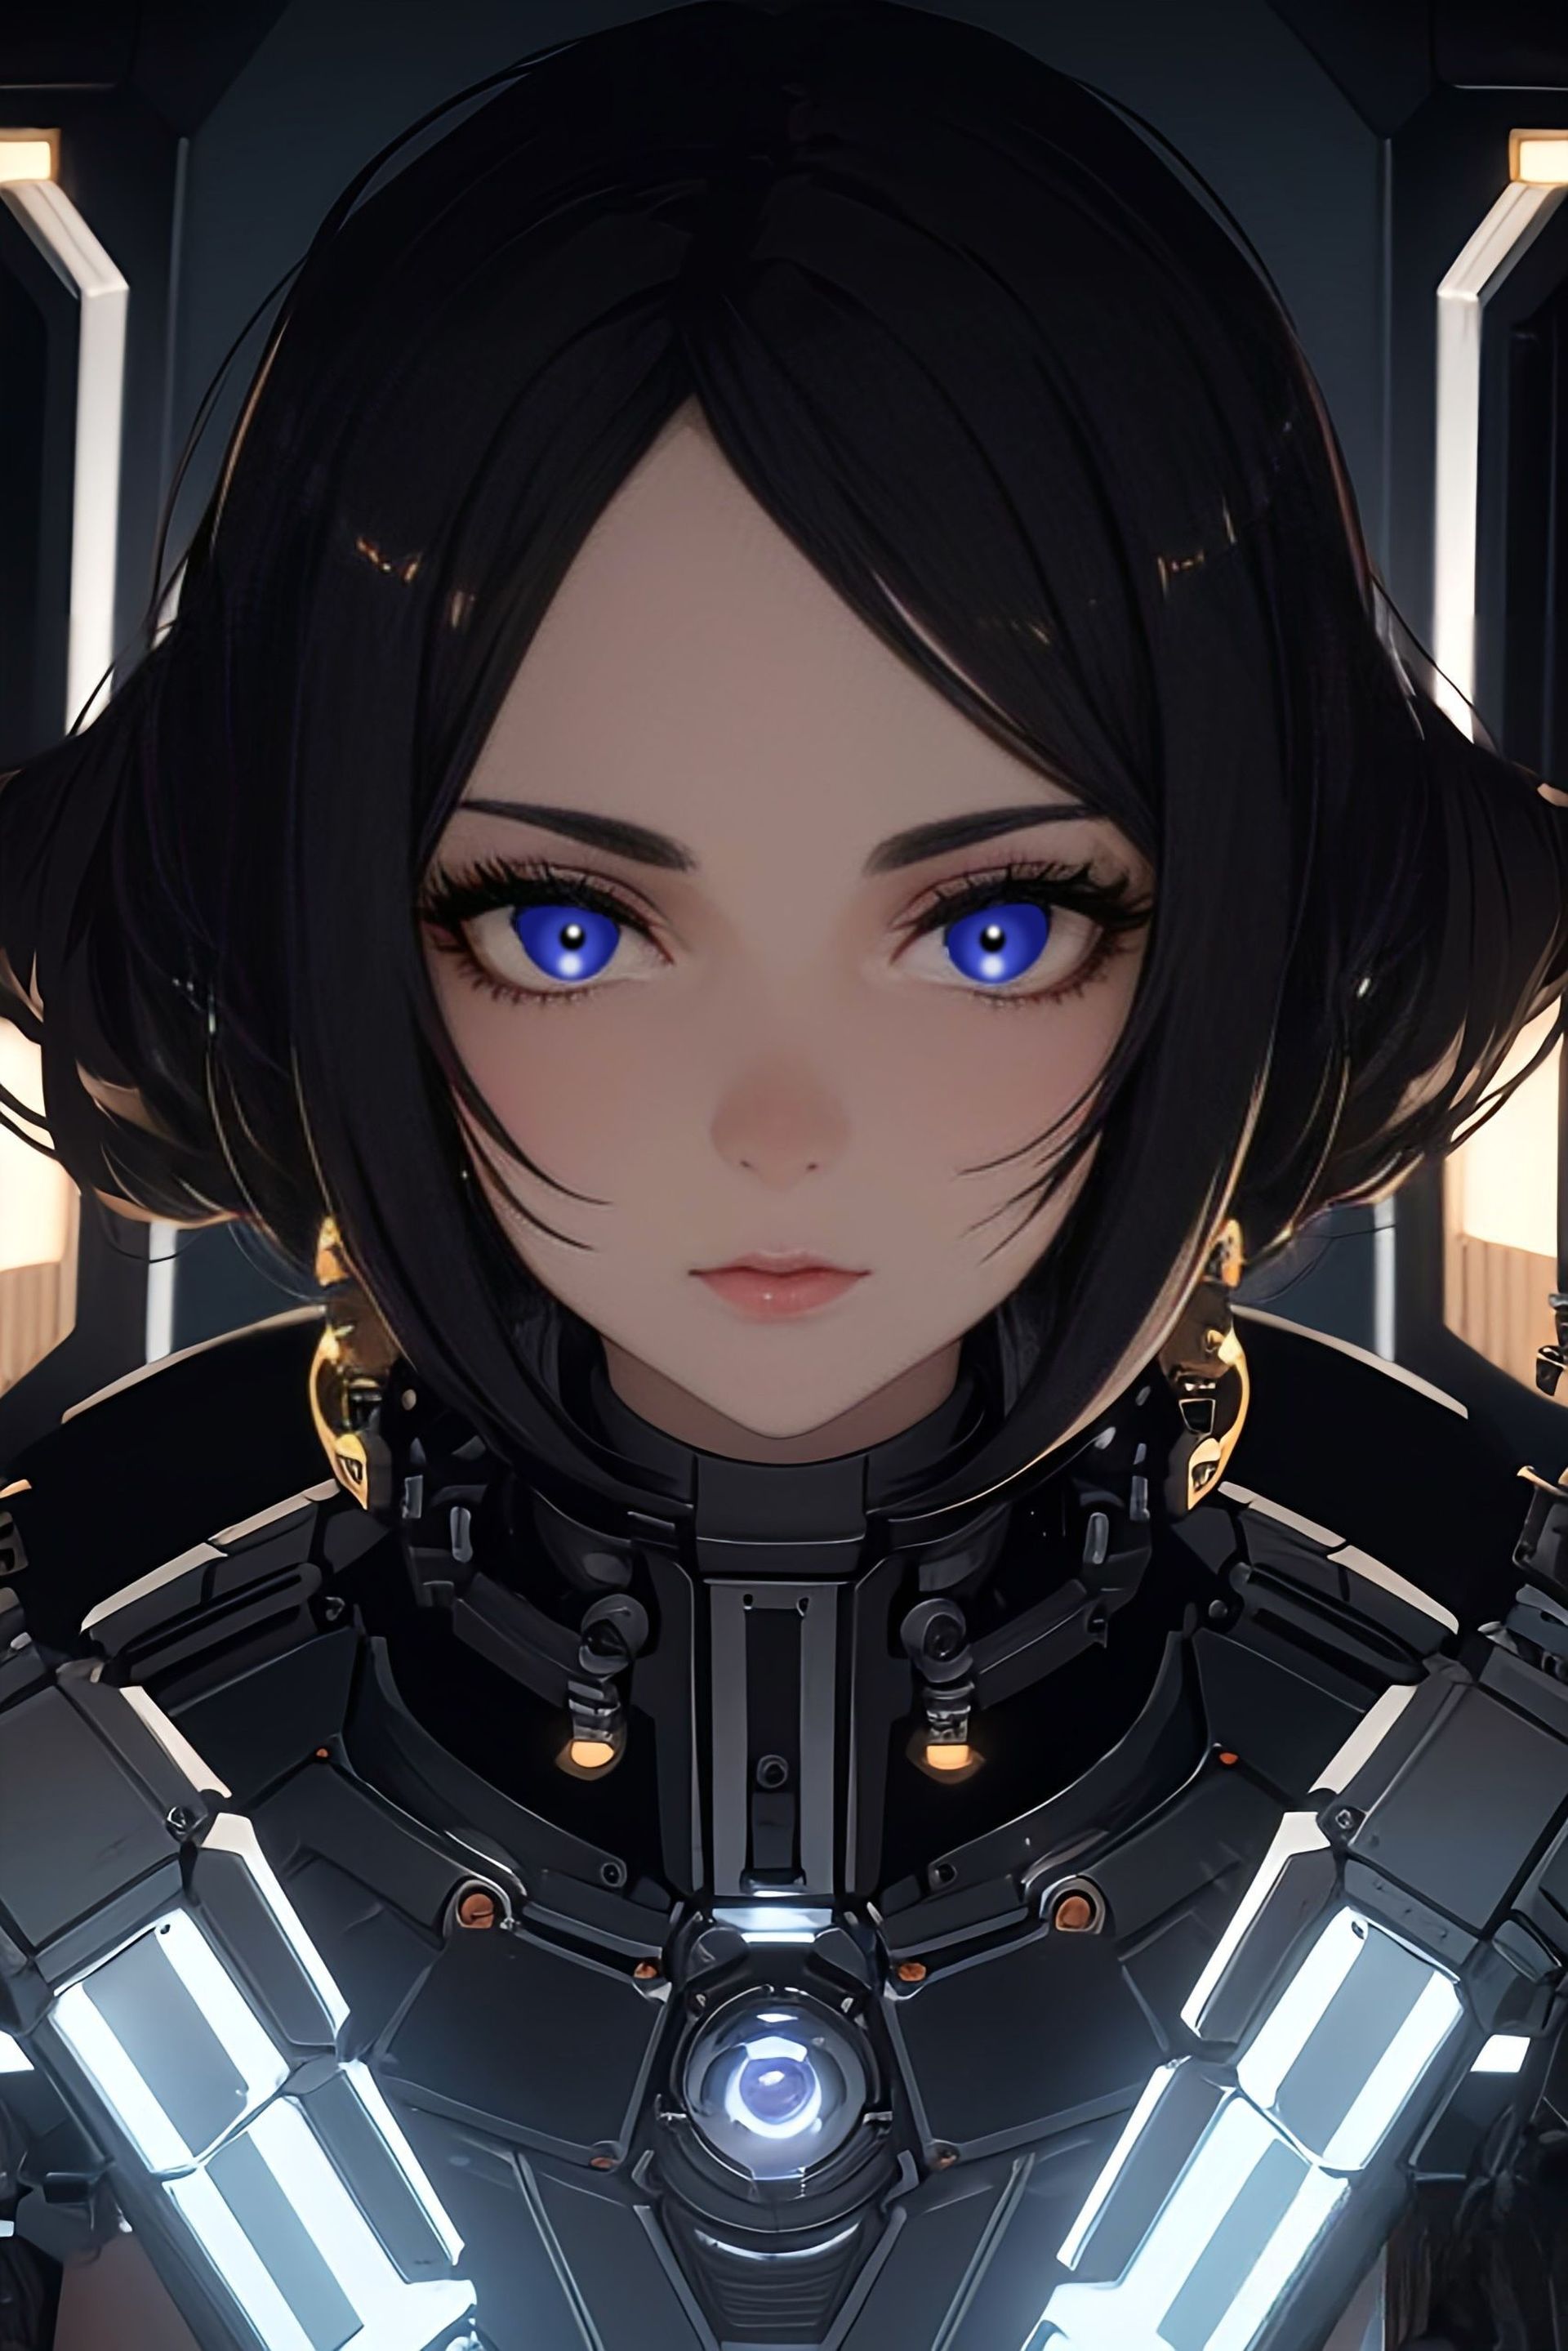 A girl, a robot, with blue eyes and short hair.